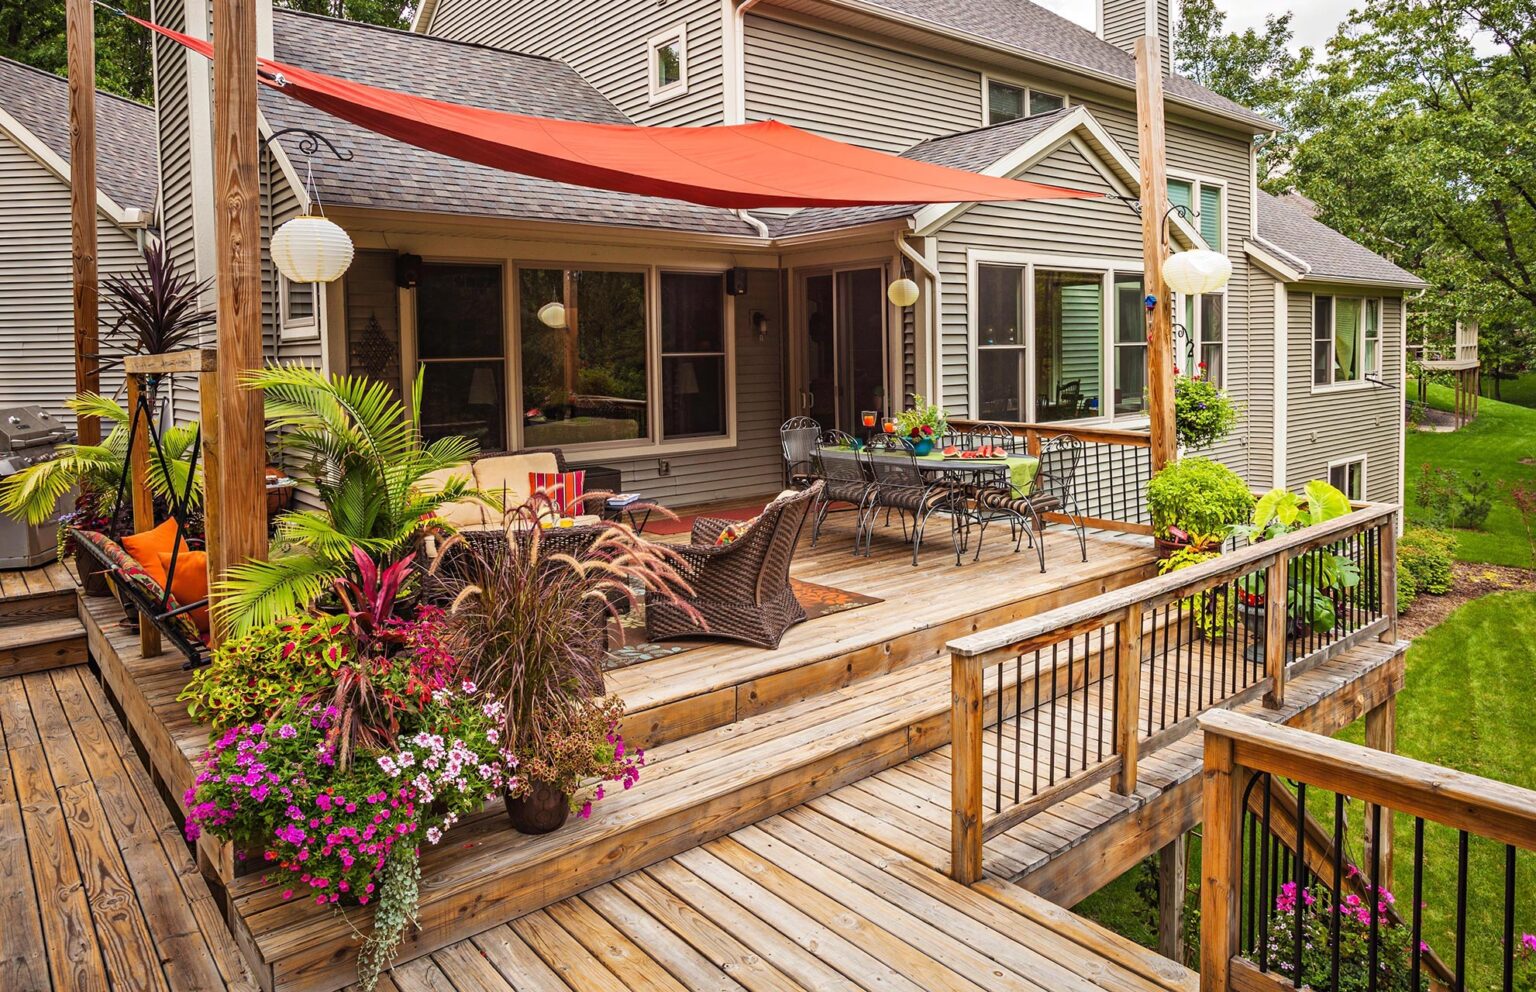 Choosing a deck for your home can be a daunting task. Here are 7 factors to consider when purchasing a deck.